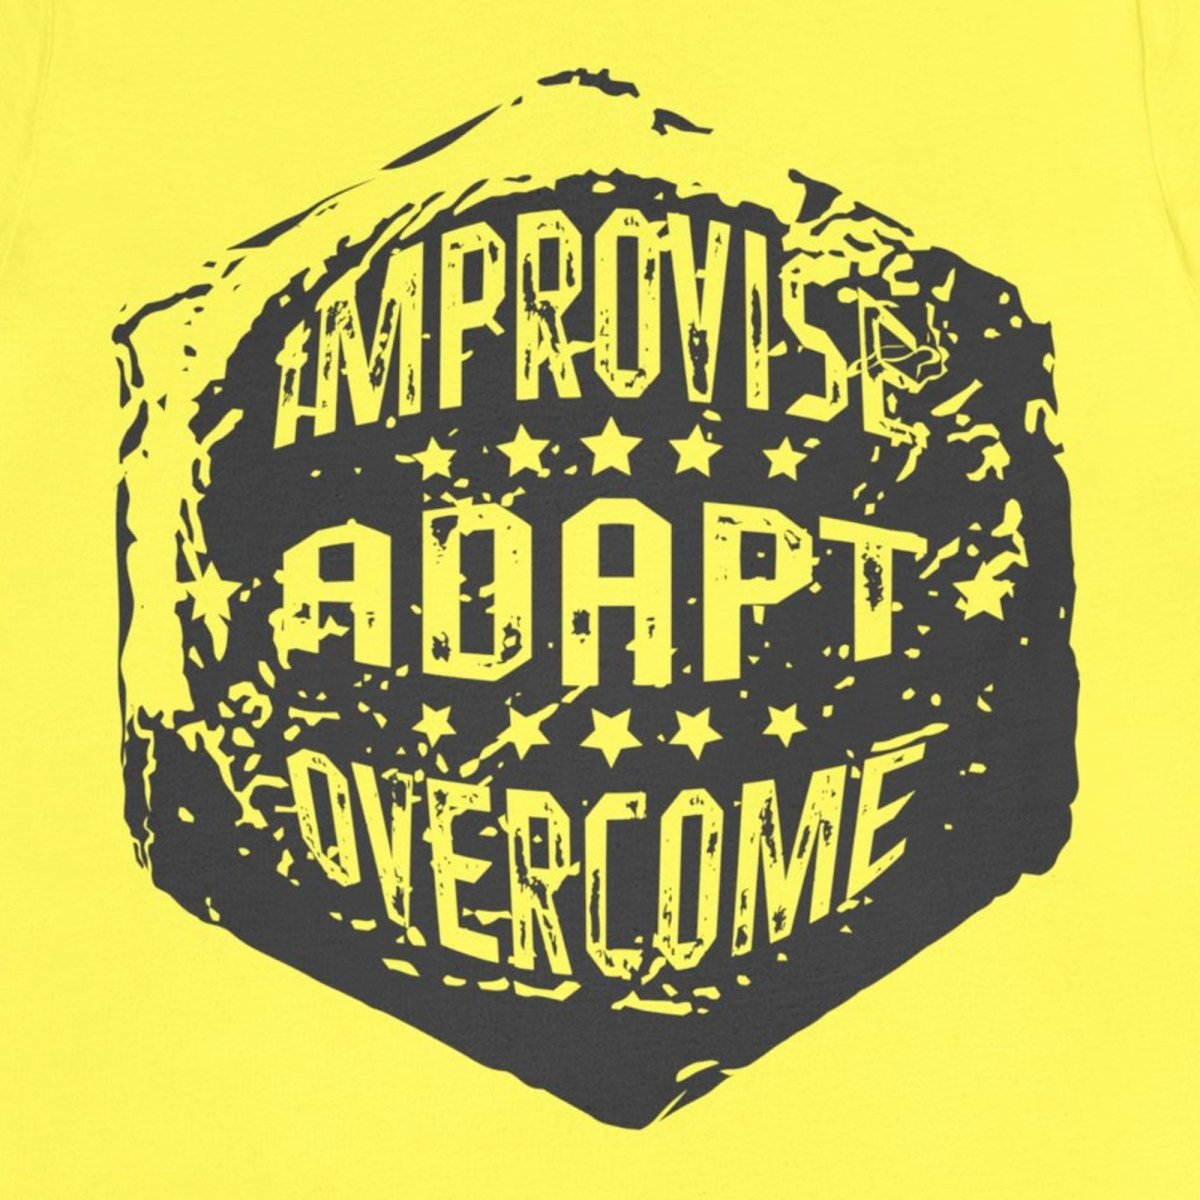 Improvise Adapt Overcome Premium T-Shirt, Leadership Solution, Overcome Obstacles Inspiration